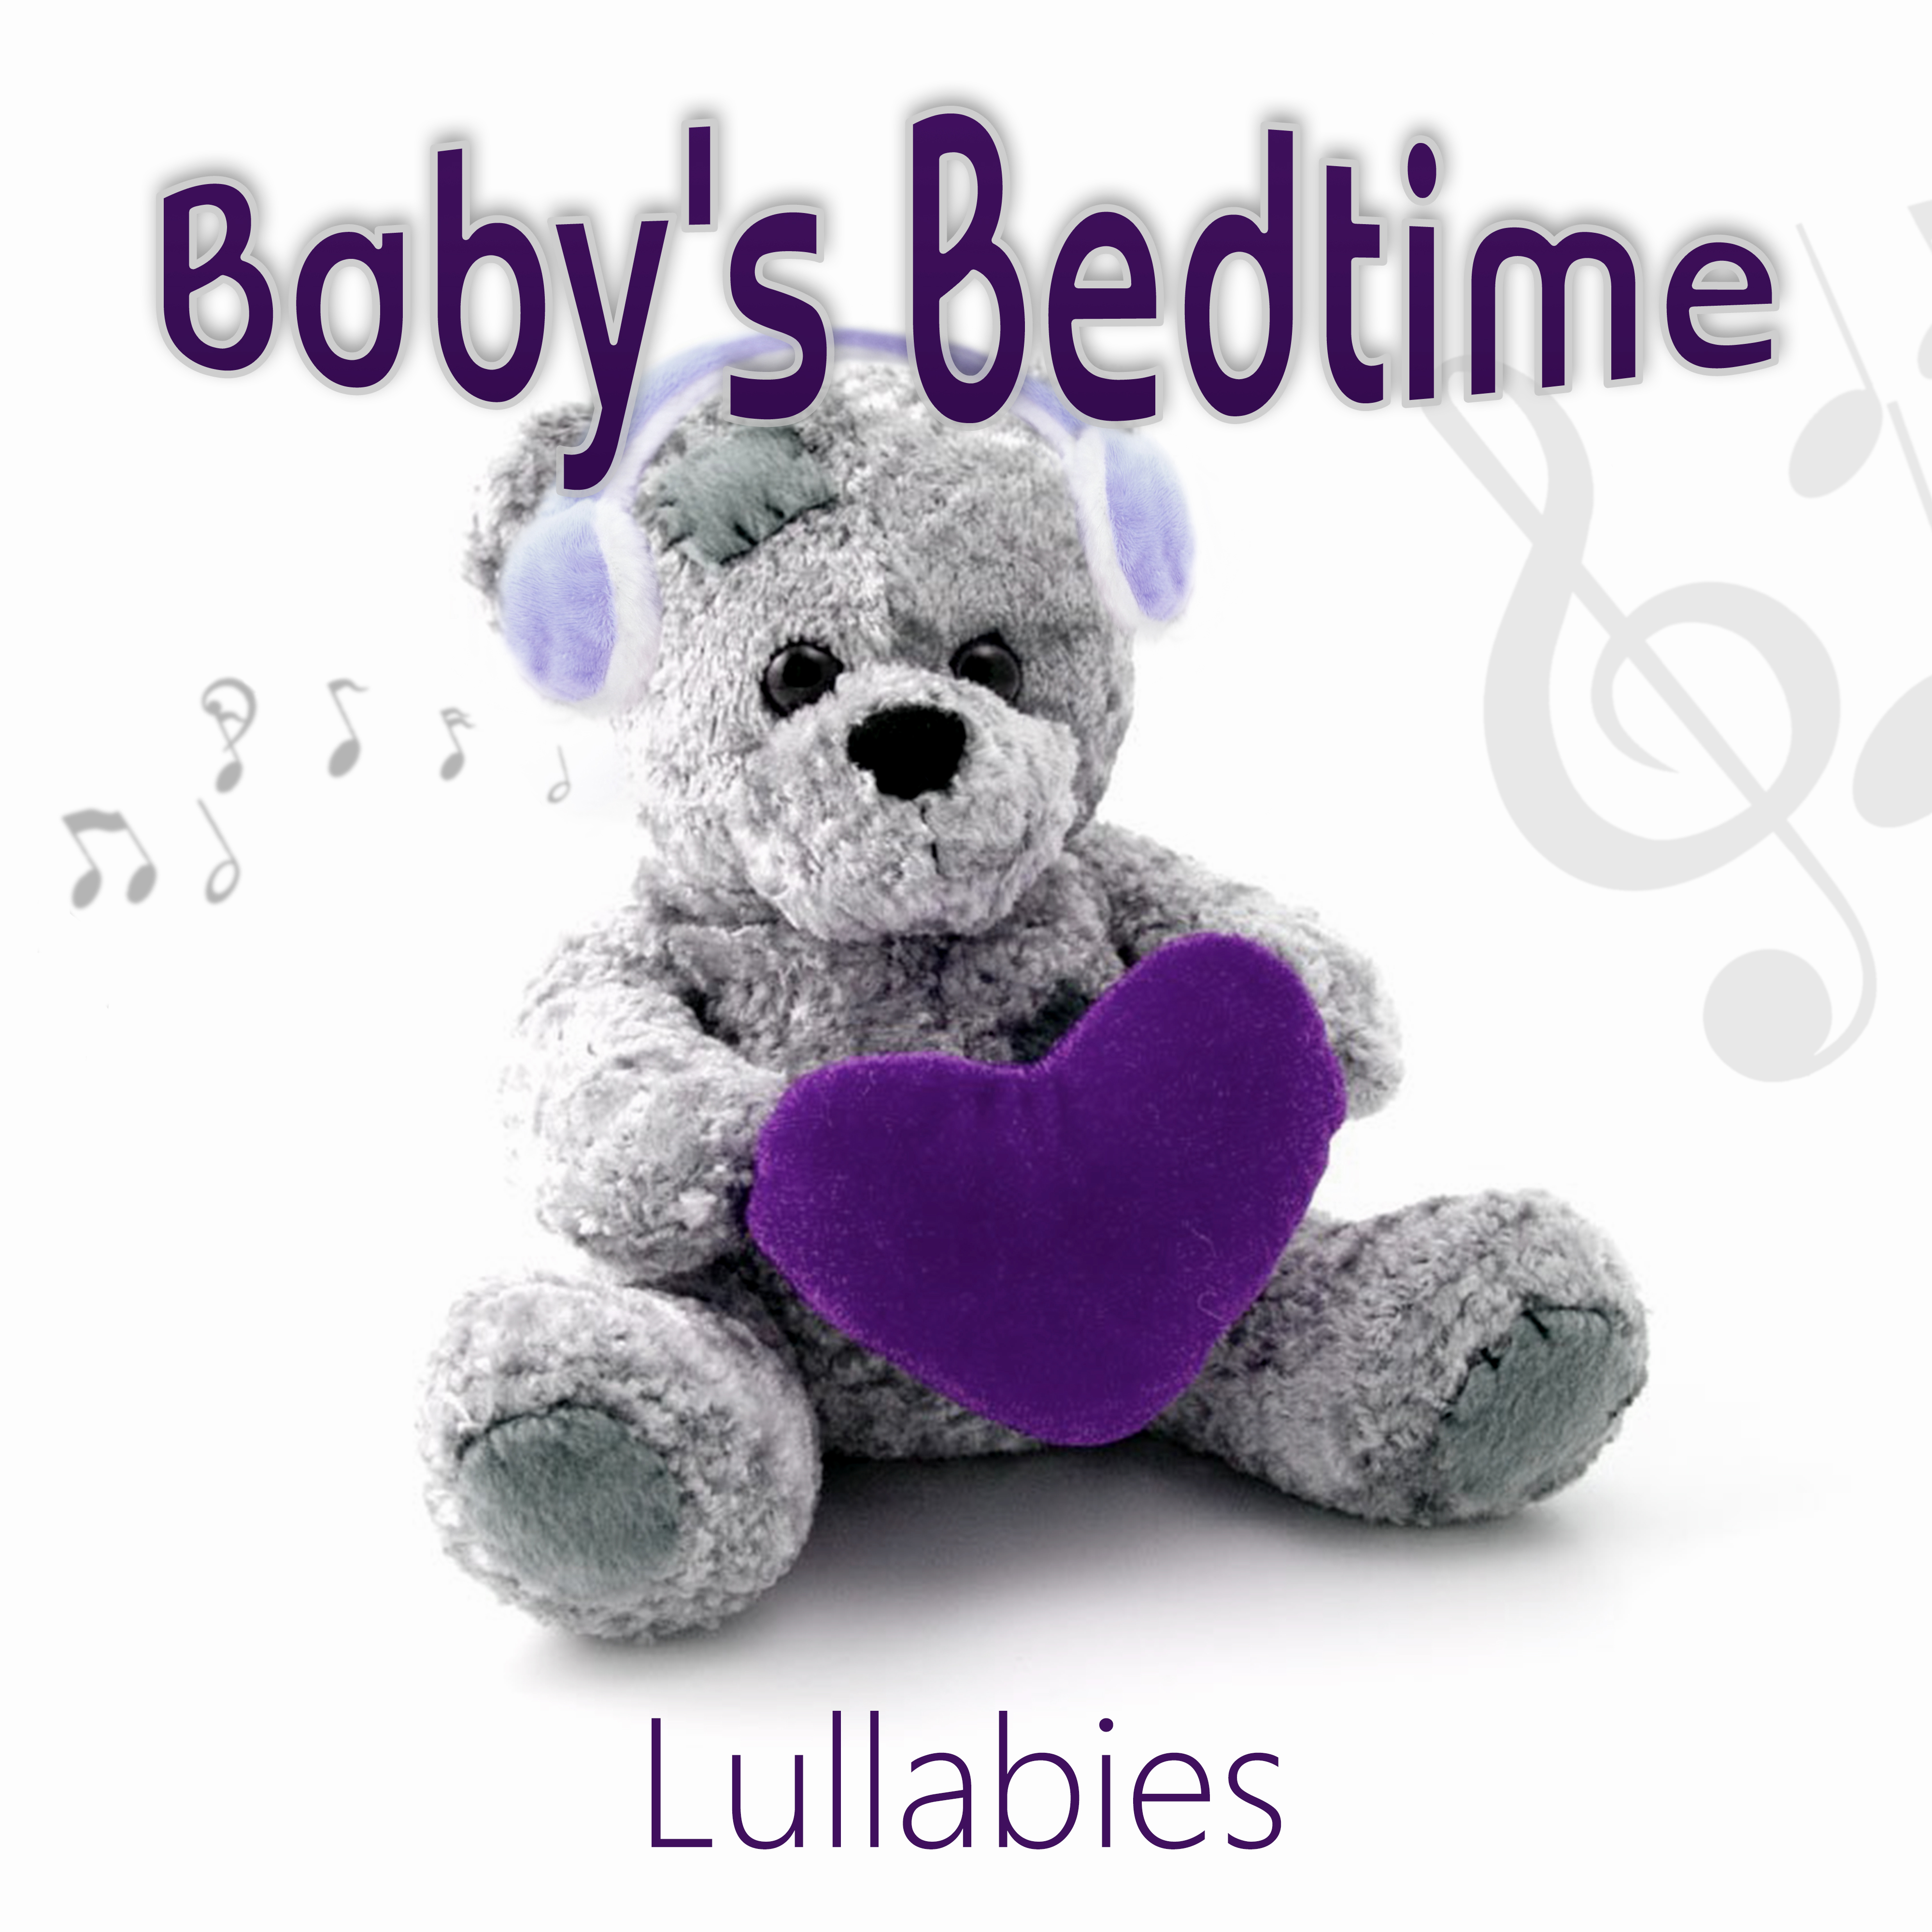 Baby's Bedtime Lullabies – Piano Lullabies with Nature Sounds for Baby Sleep, Nursery Rhymes, White Noise, Newborn Sleep Music